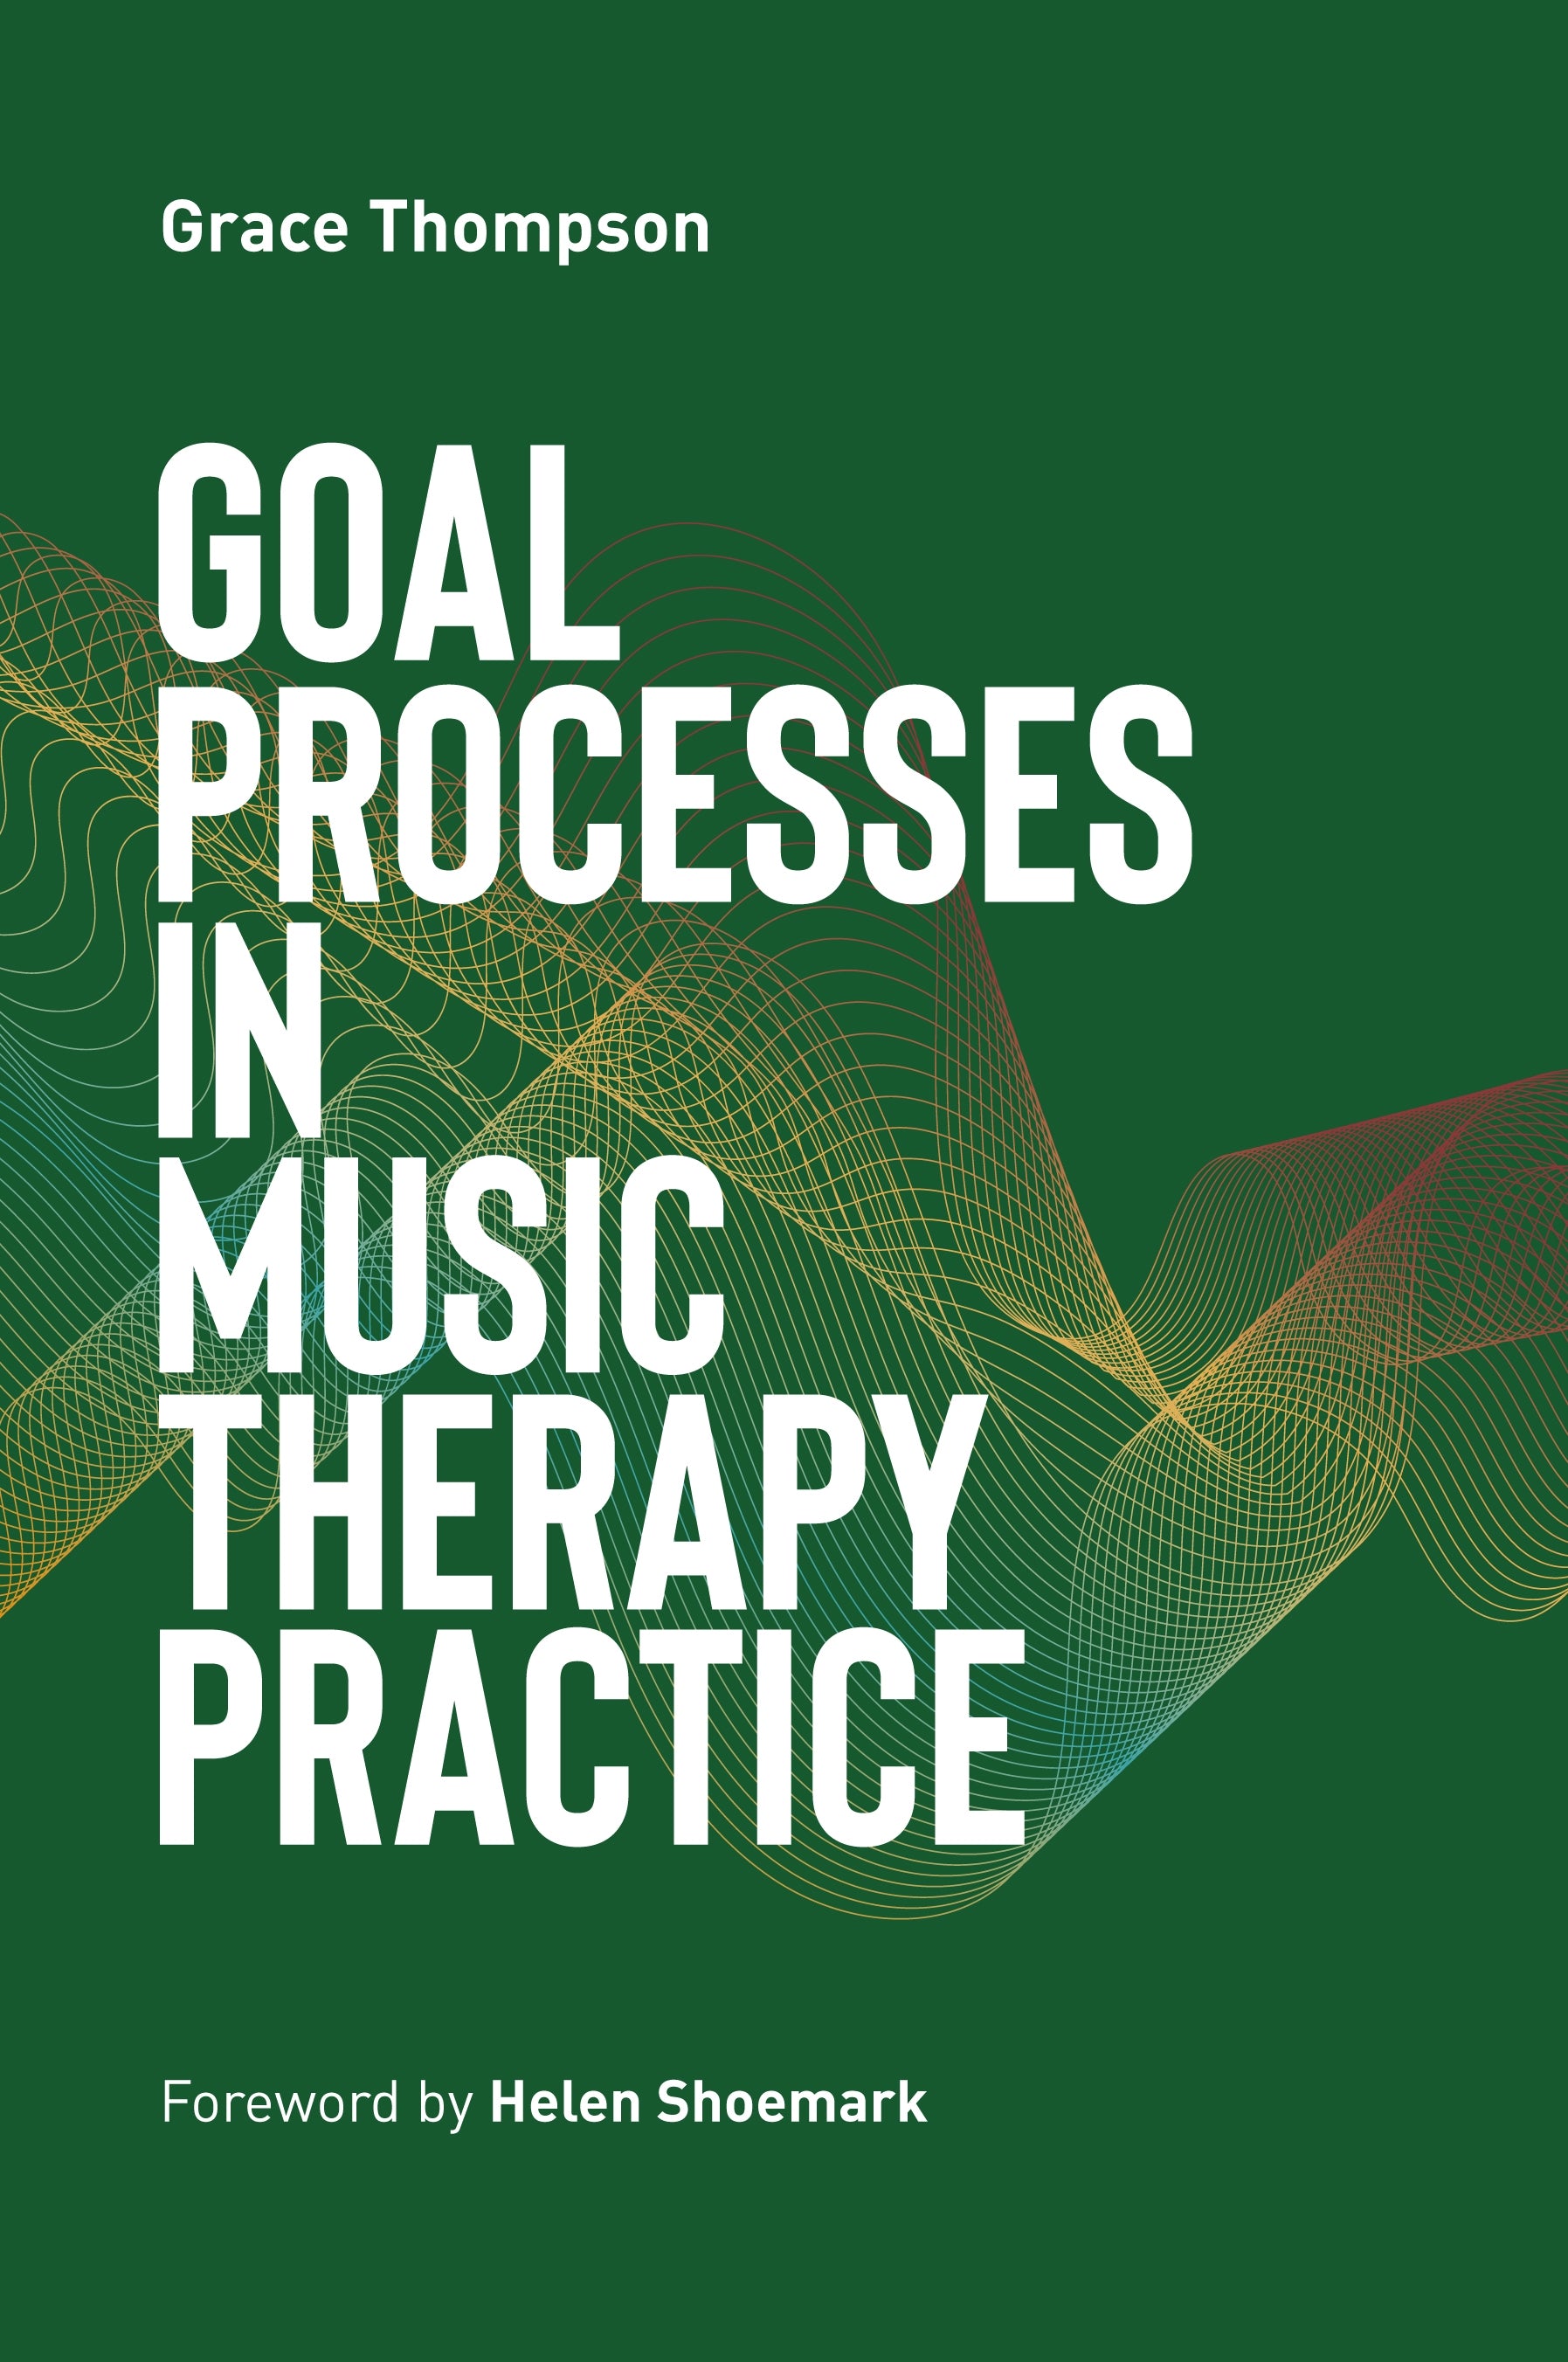 Goal Processes in Music Therapy Practice by Grace Thompson, Helen Shoemark